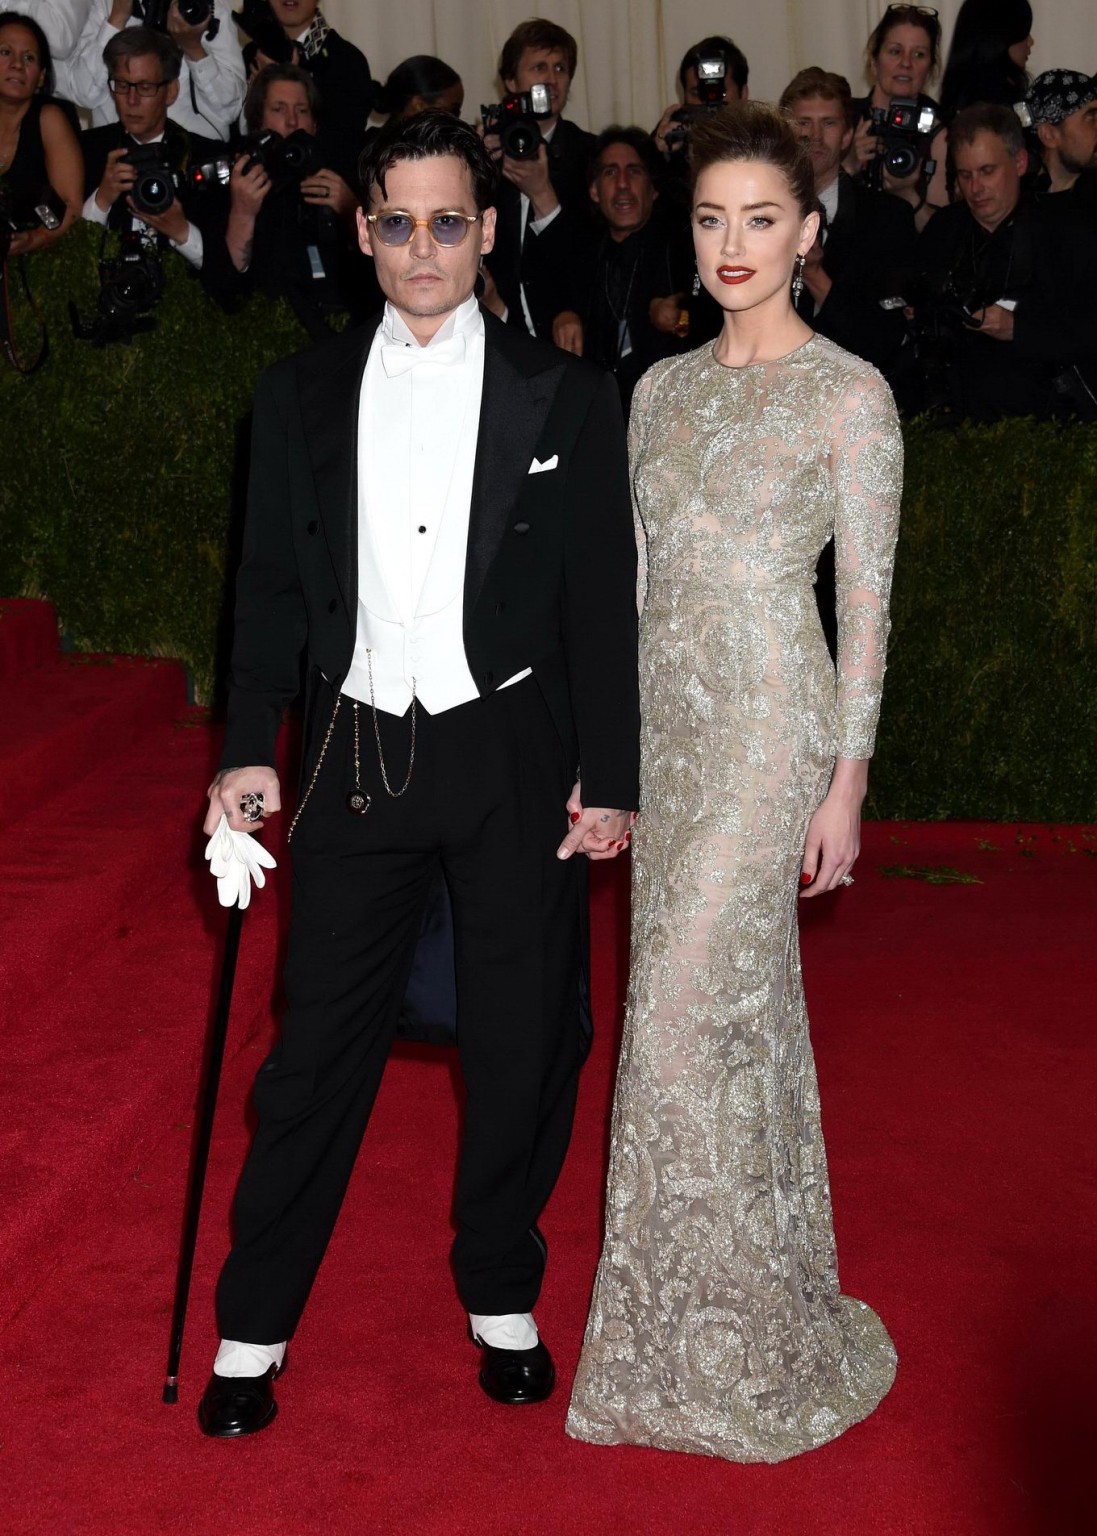 Amber Heard braless wearing a see through dress at the 2014 Met Gala in NY #75197626